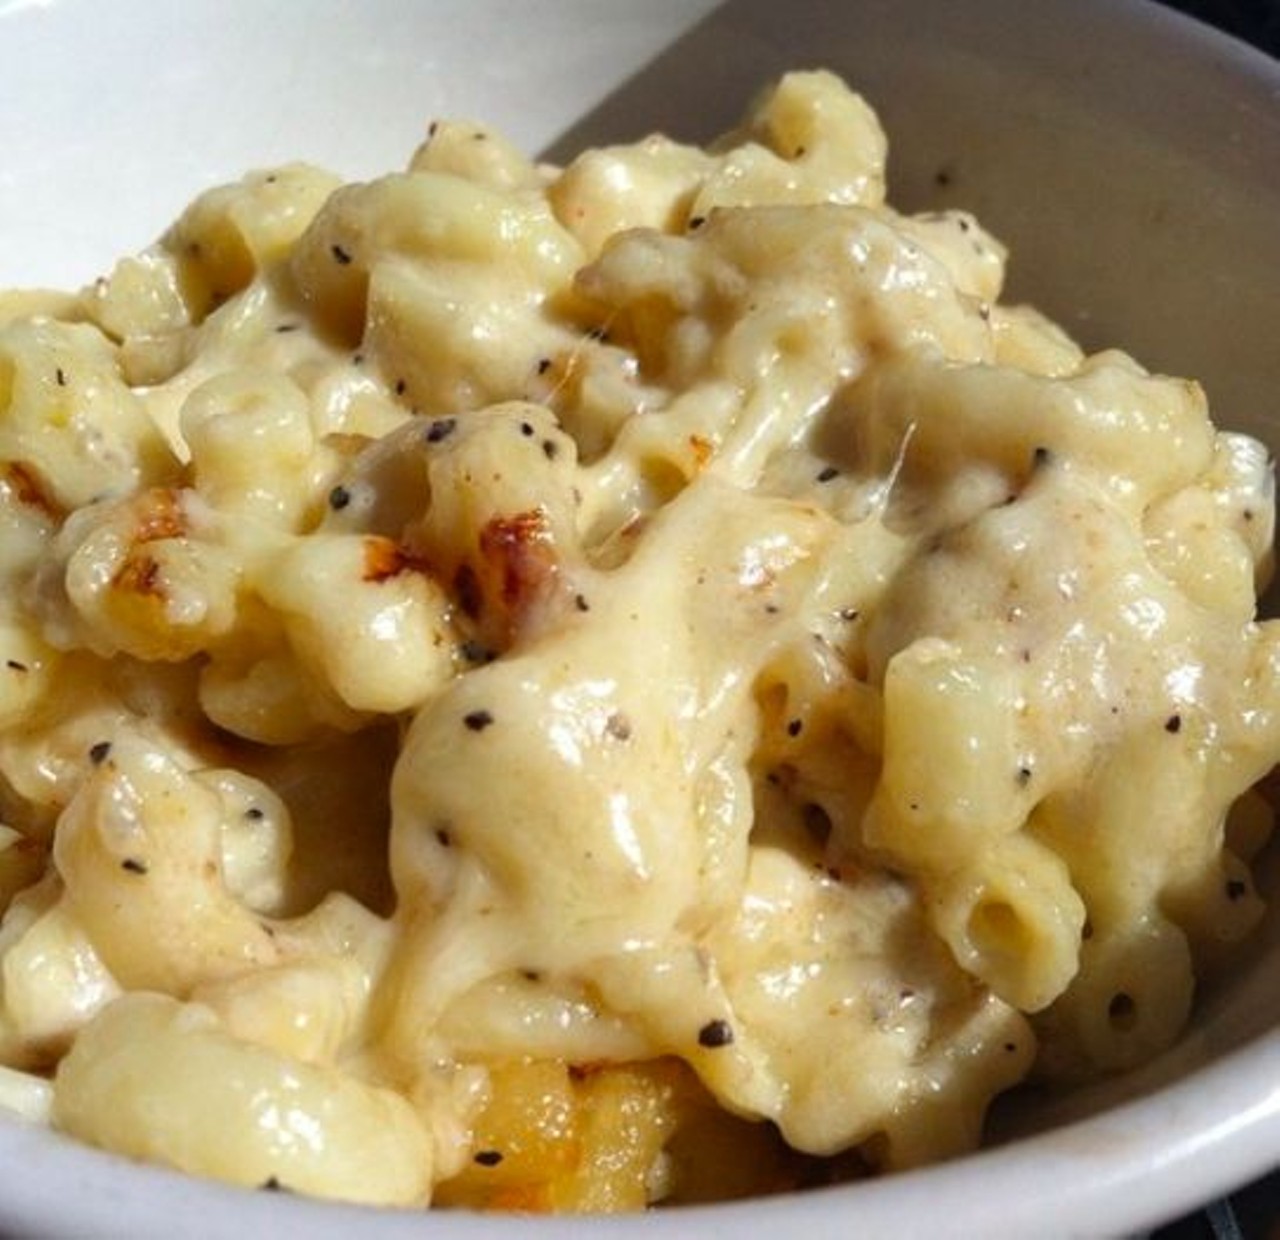 Zingerman&#146;s Delicatessen
422 Detroit St., Ann Arbor
734-663-3354
The Food Network&#146;s Alton Brown once called Zingerman&#146;s mac, &#147;America&#146;s Best Comfort Food.&#148; It&#146;s Italian macaroni covered in Vermont cheddar and Swiss Emmental cheeses.
Photo via Foodspotting user Foodangel.</em